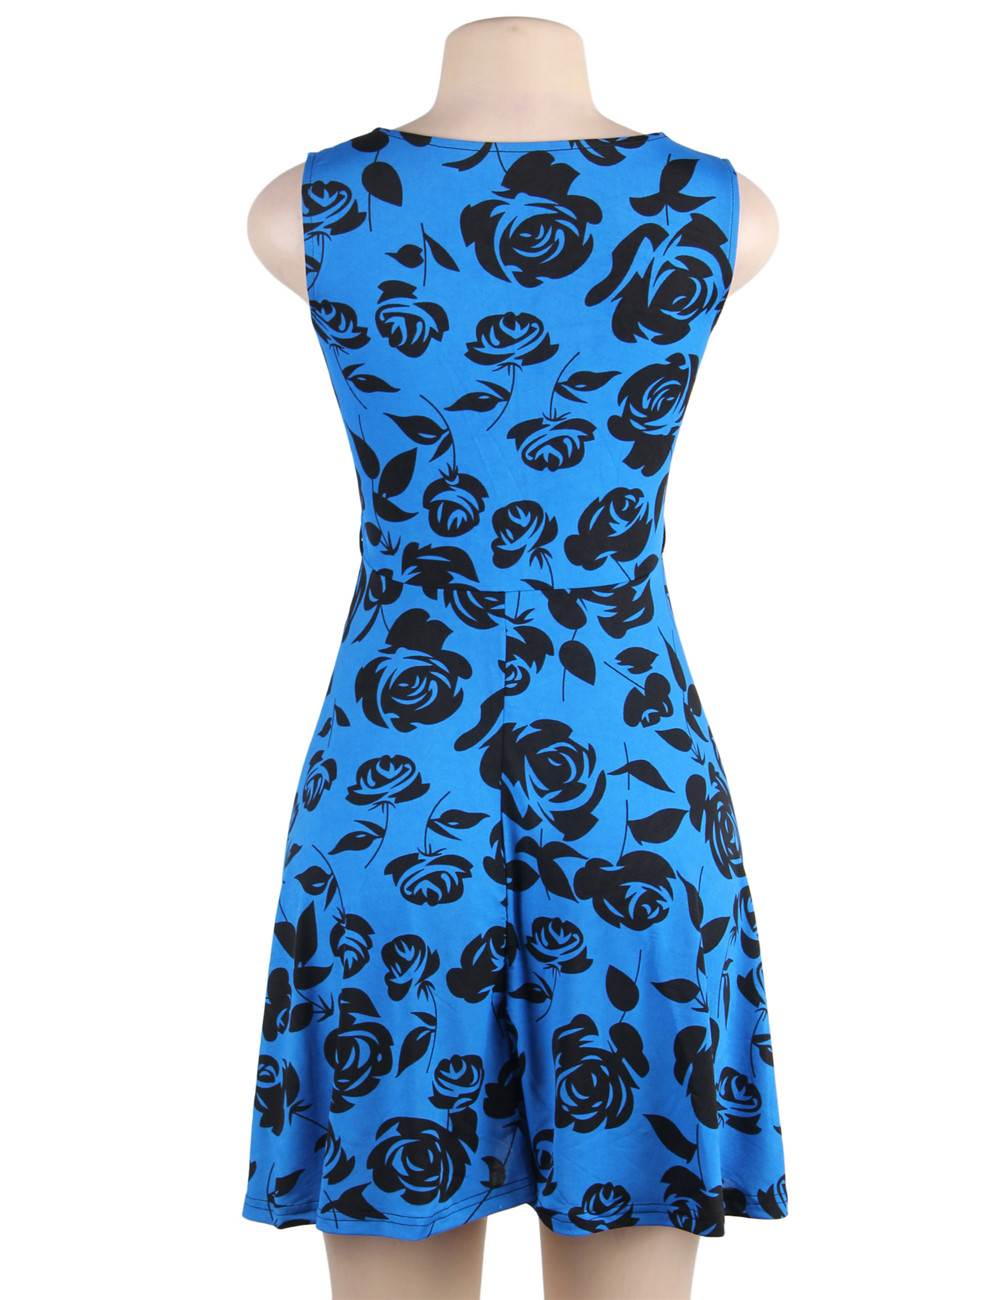 To Purchas The Print Dress For Women At Ohyeah Online Store|Ohyeah888.com